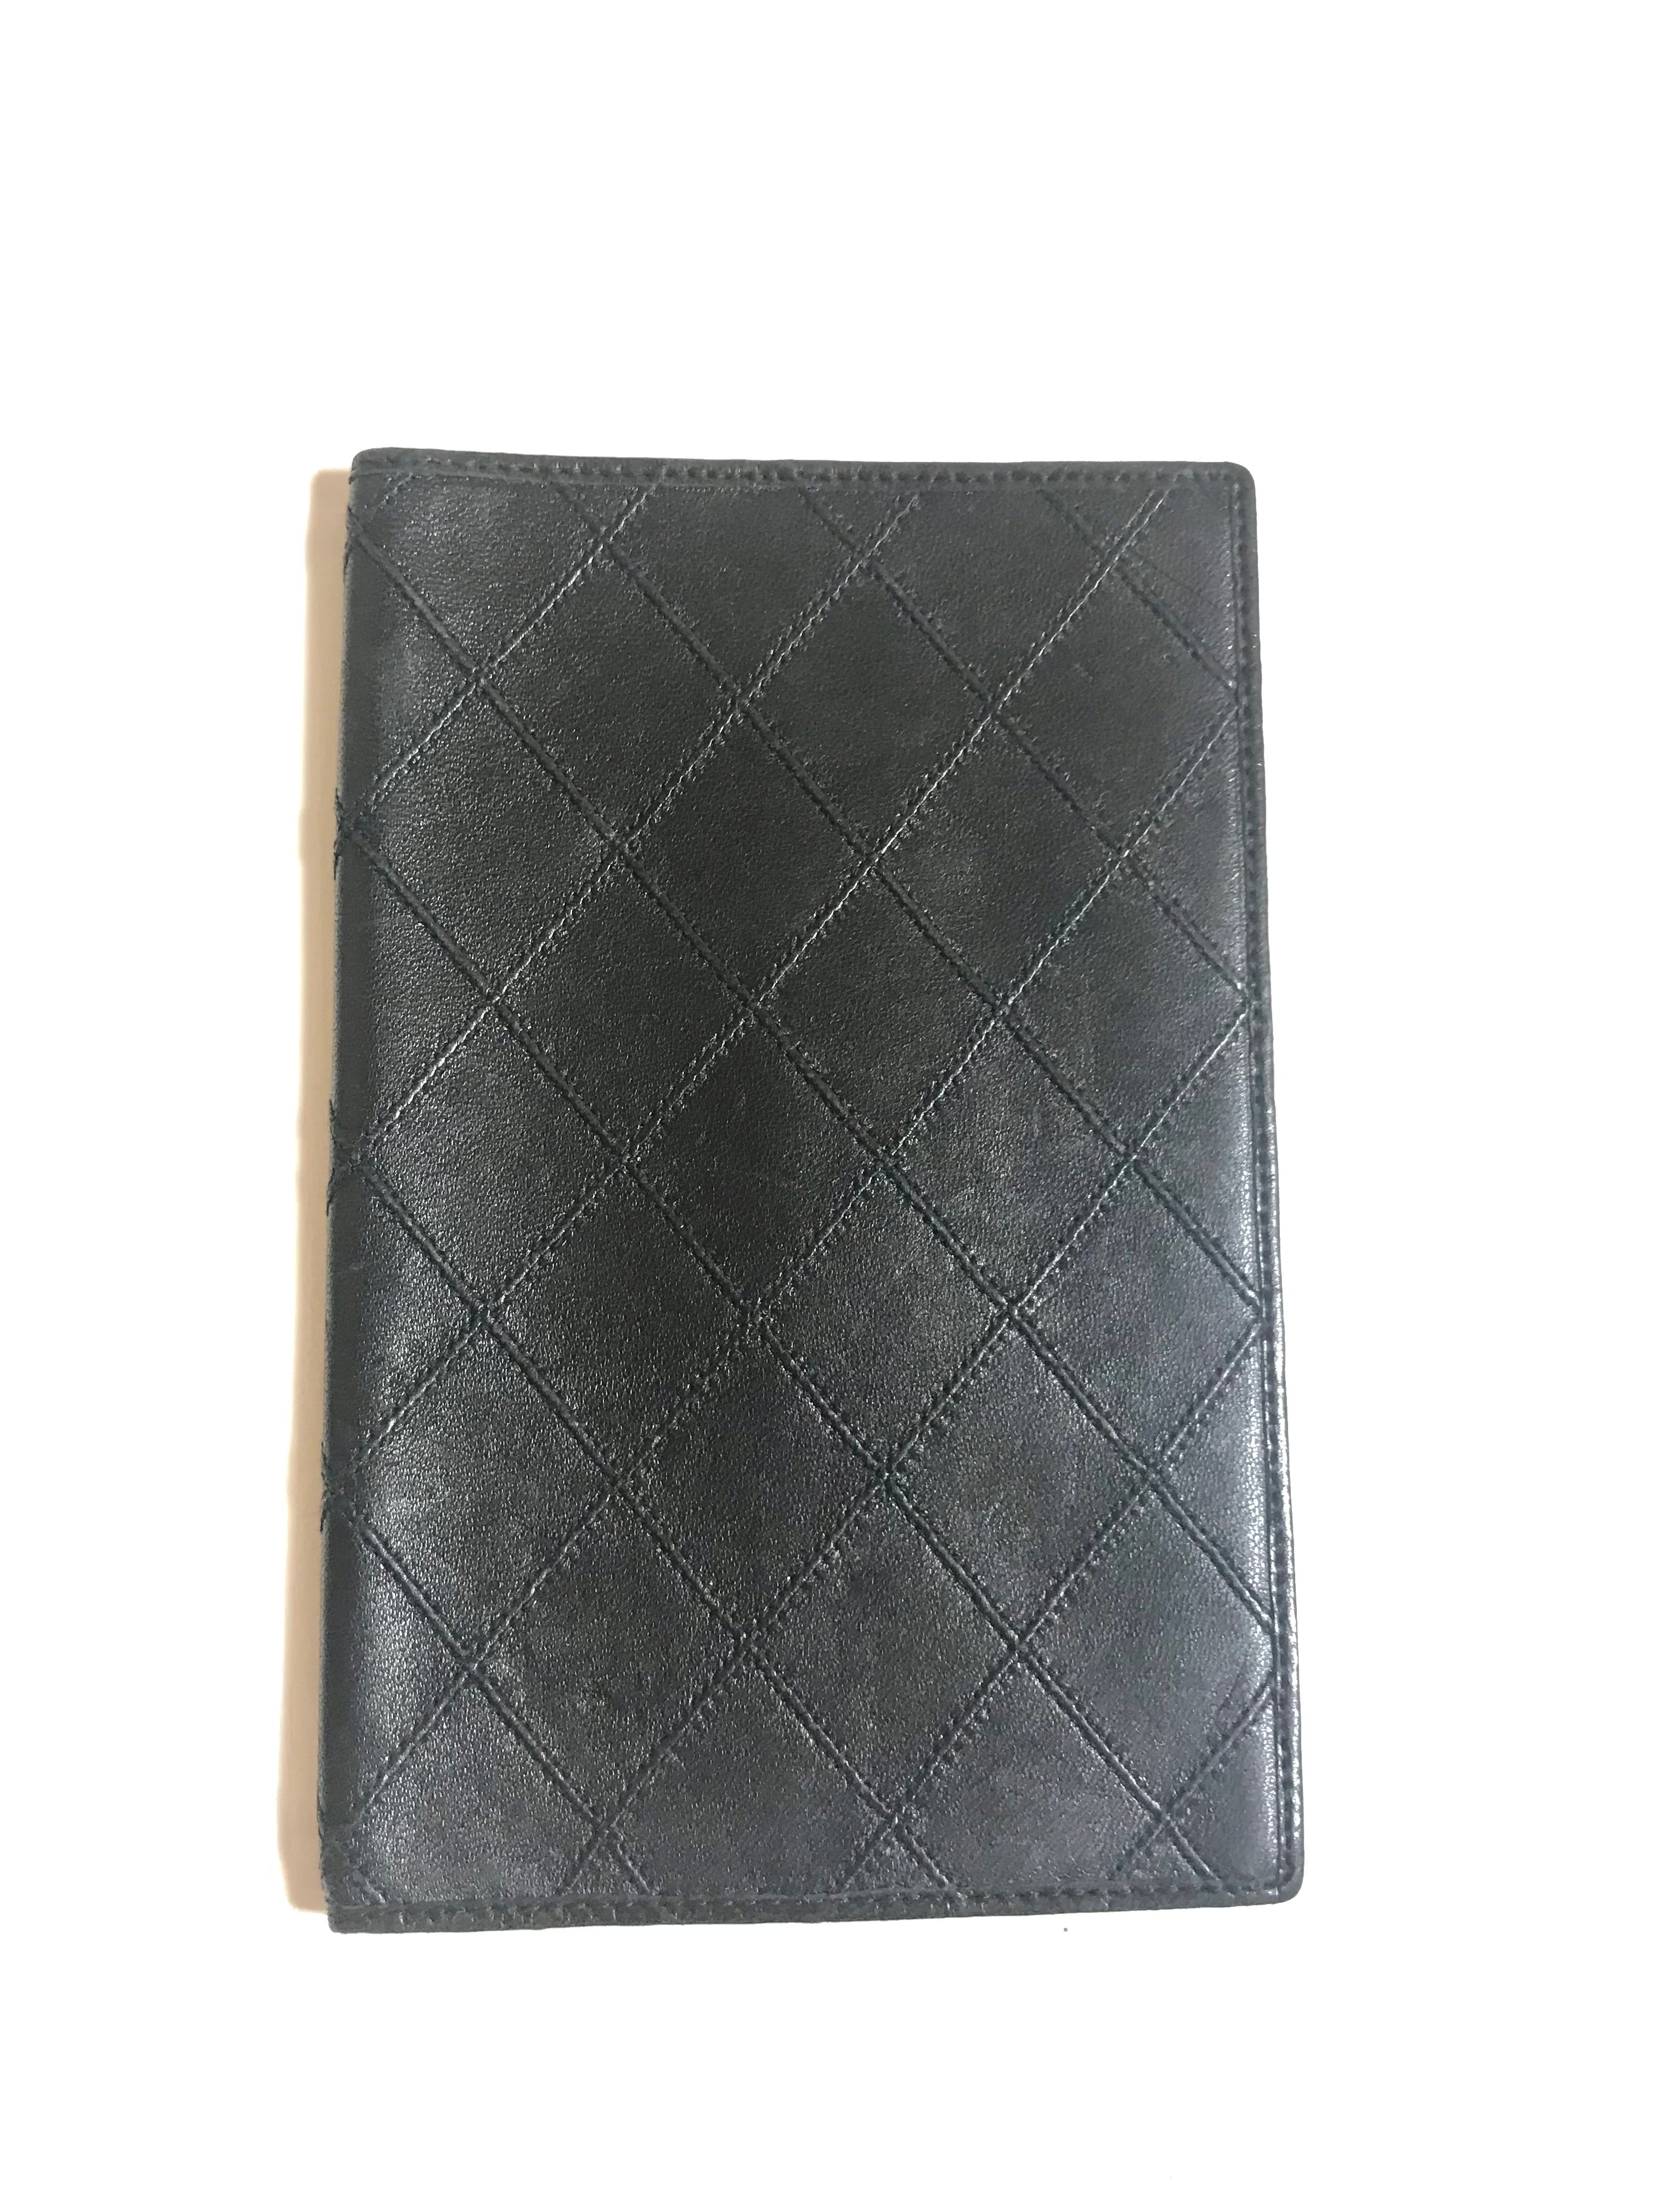 Vintage CHANEL black stitched leather book cover, diary cover